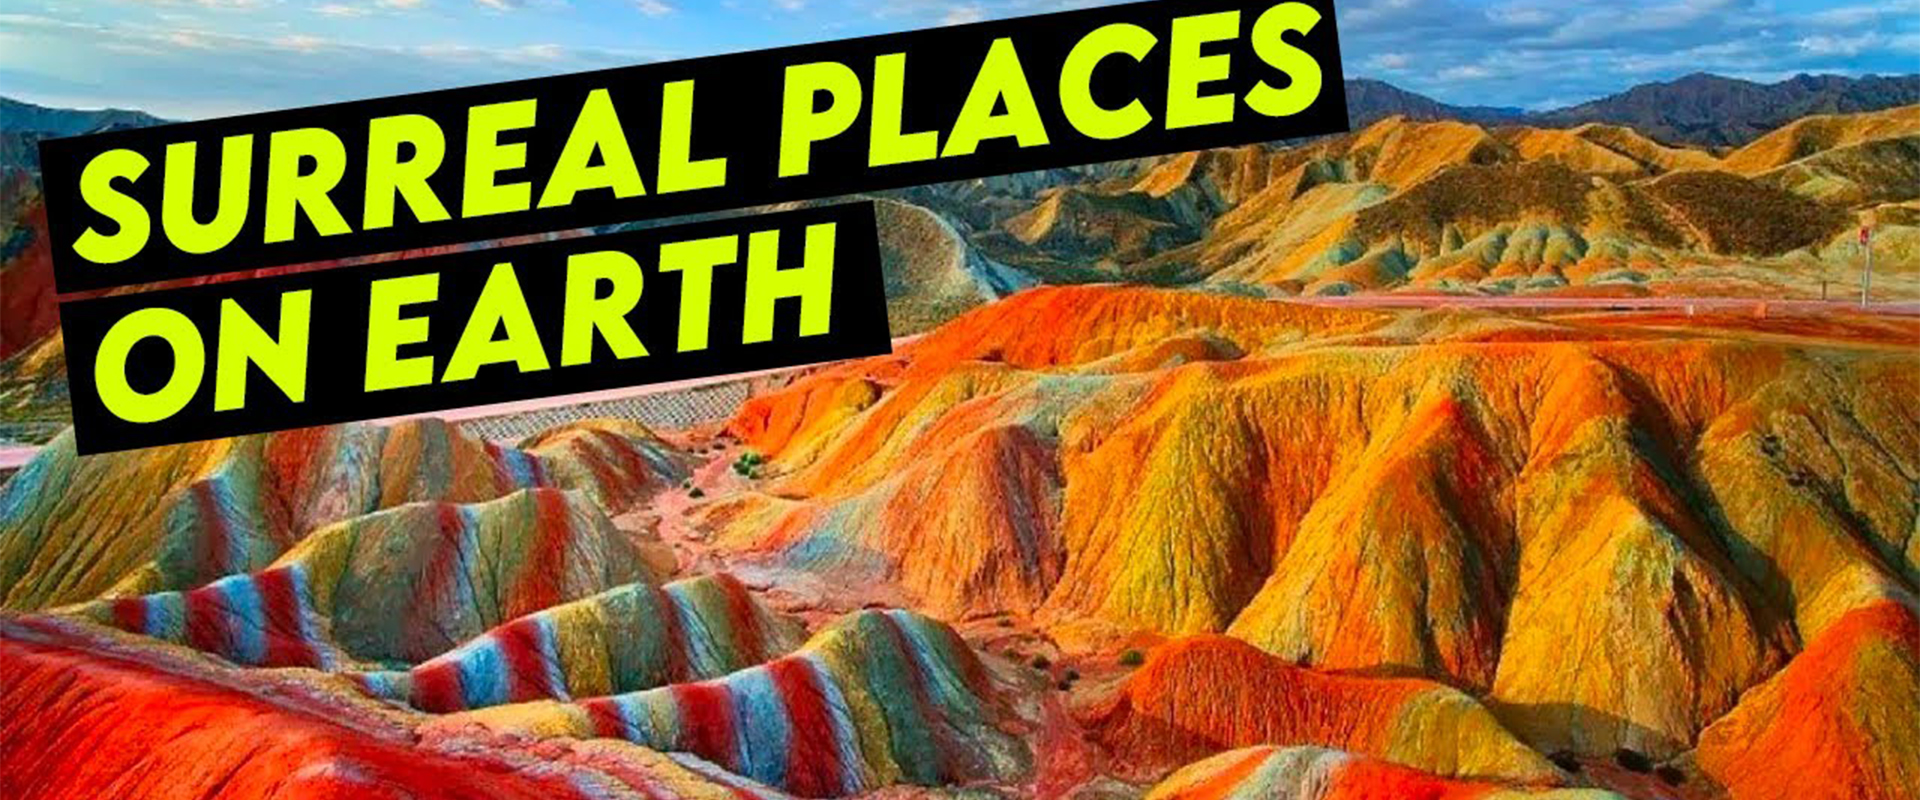 ⁣25 Most Surreal Places on Earth - Travel Video 